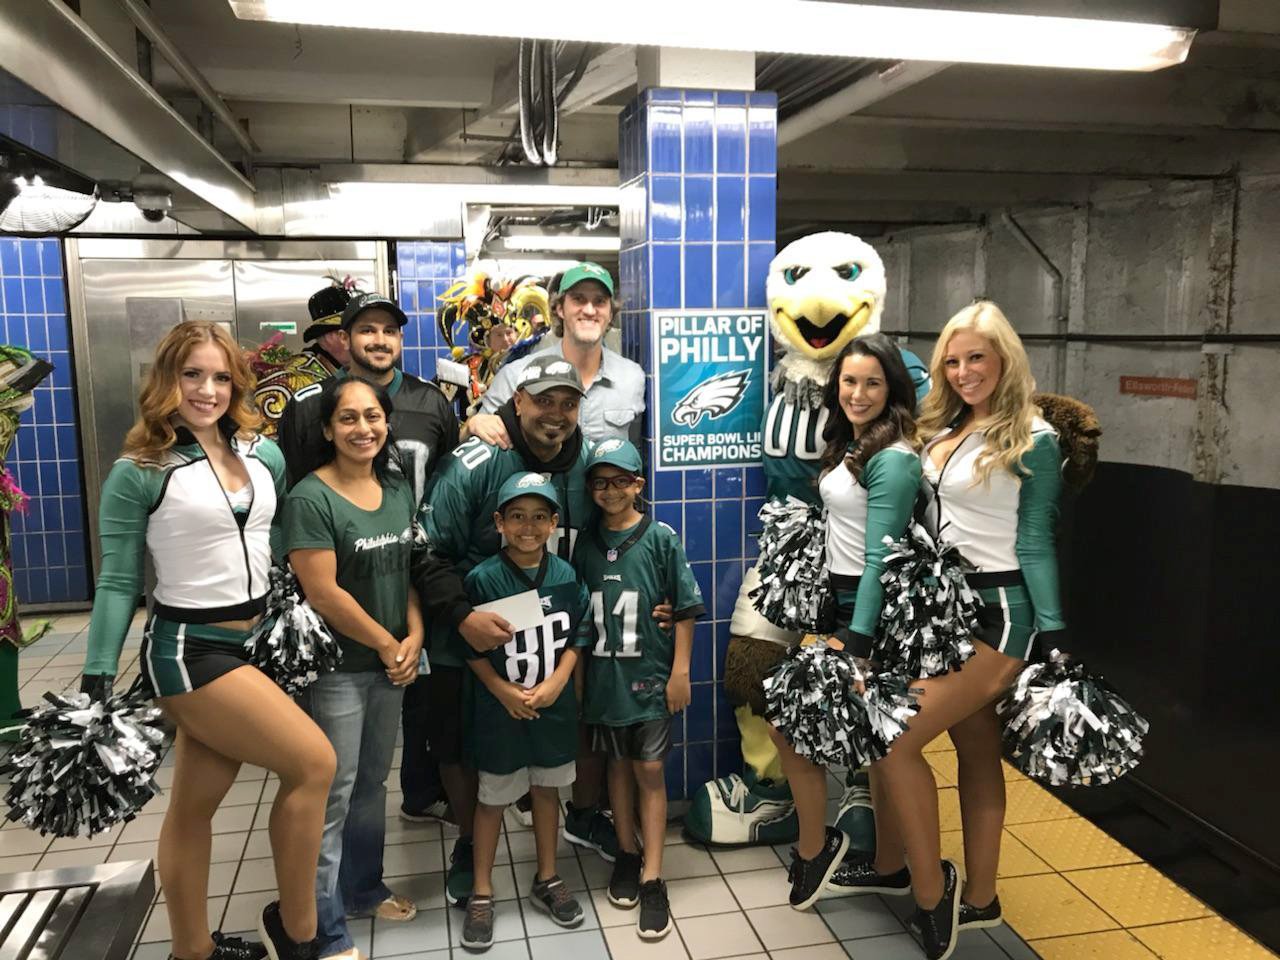 Eagles Fan Hit With Fame After Hitting Pole Gets Some Glory The Daily